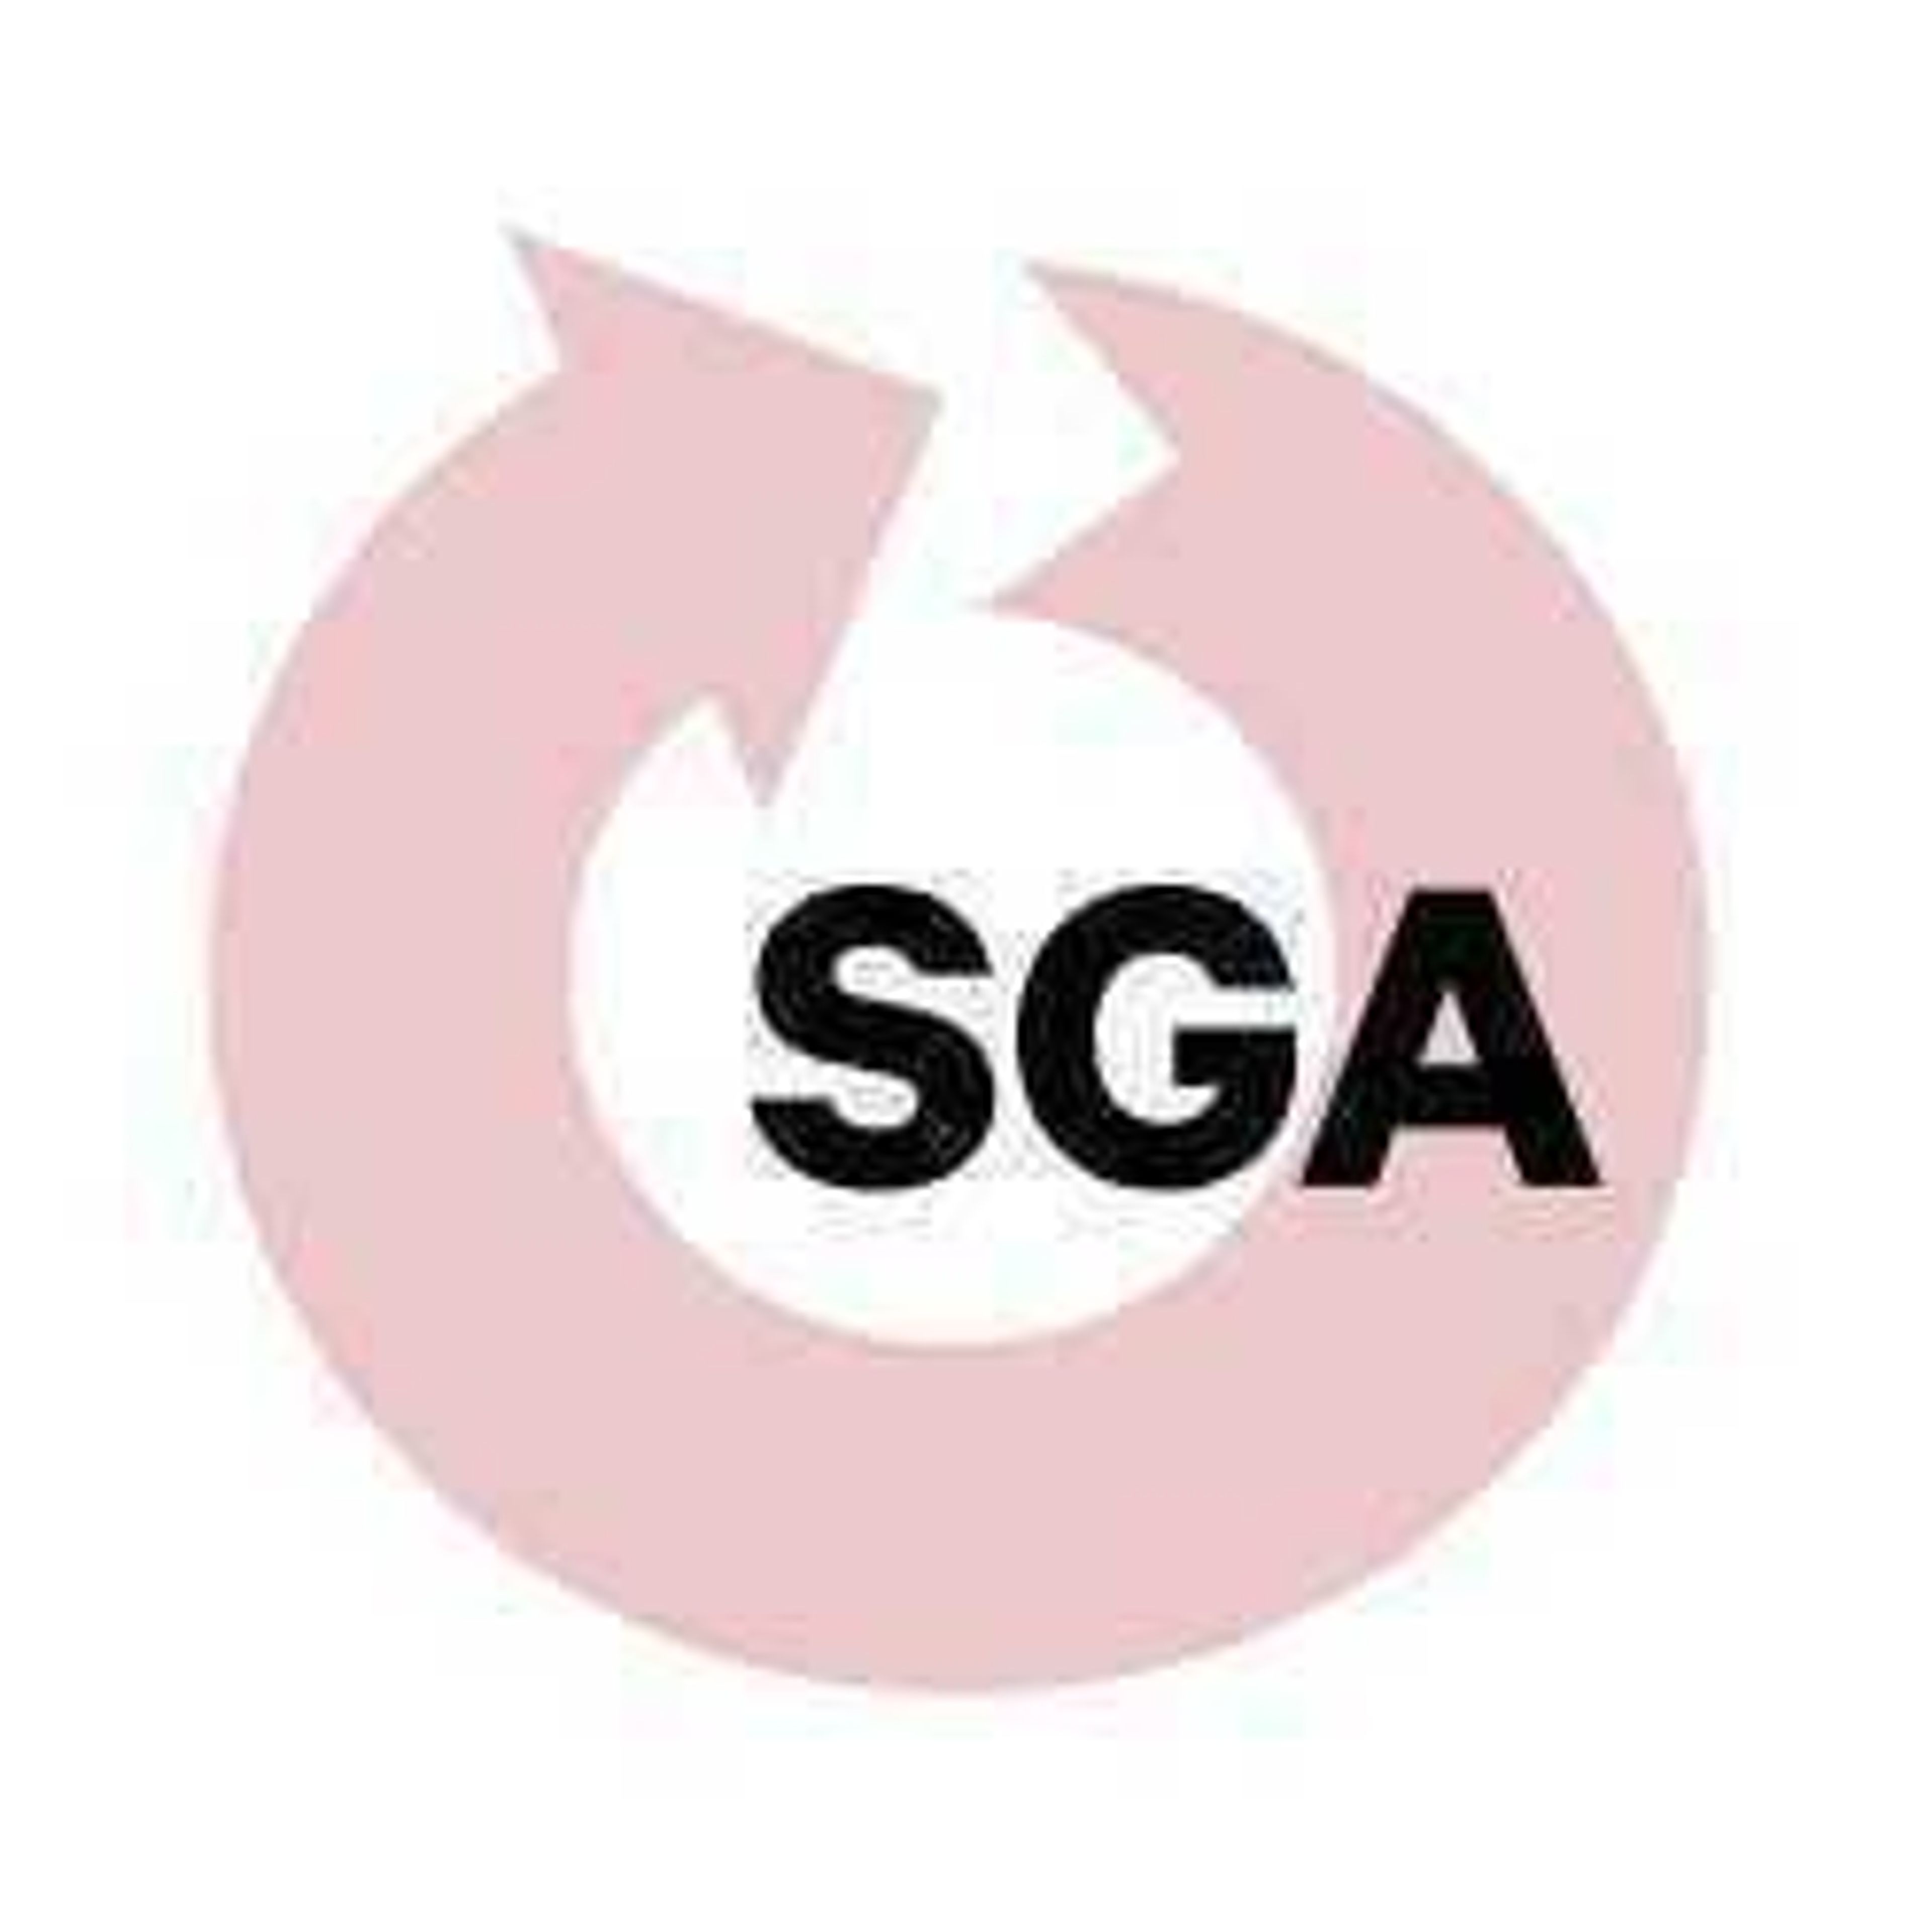 SGA appoints members to SEA organization; discusses changes to executive boards in future electoral runs